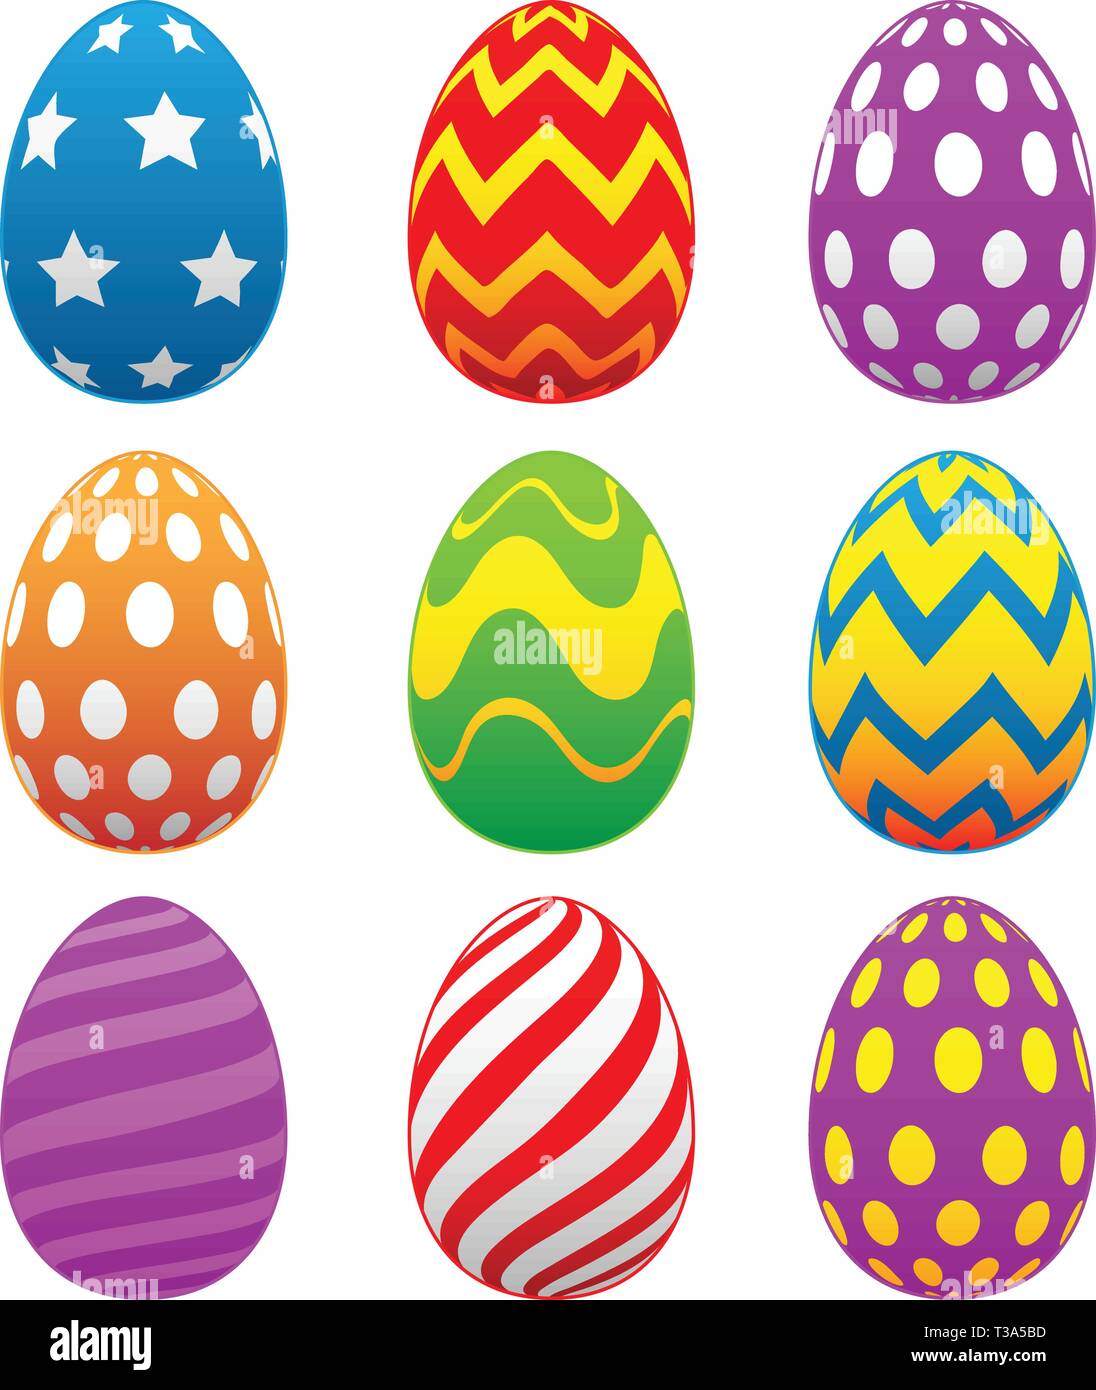 Colorful Painted Easter Eggs Isolated Vector Illustration Stock Vector